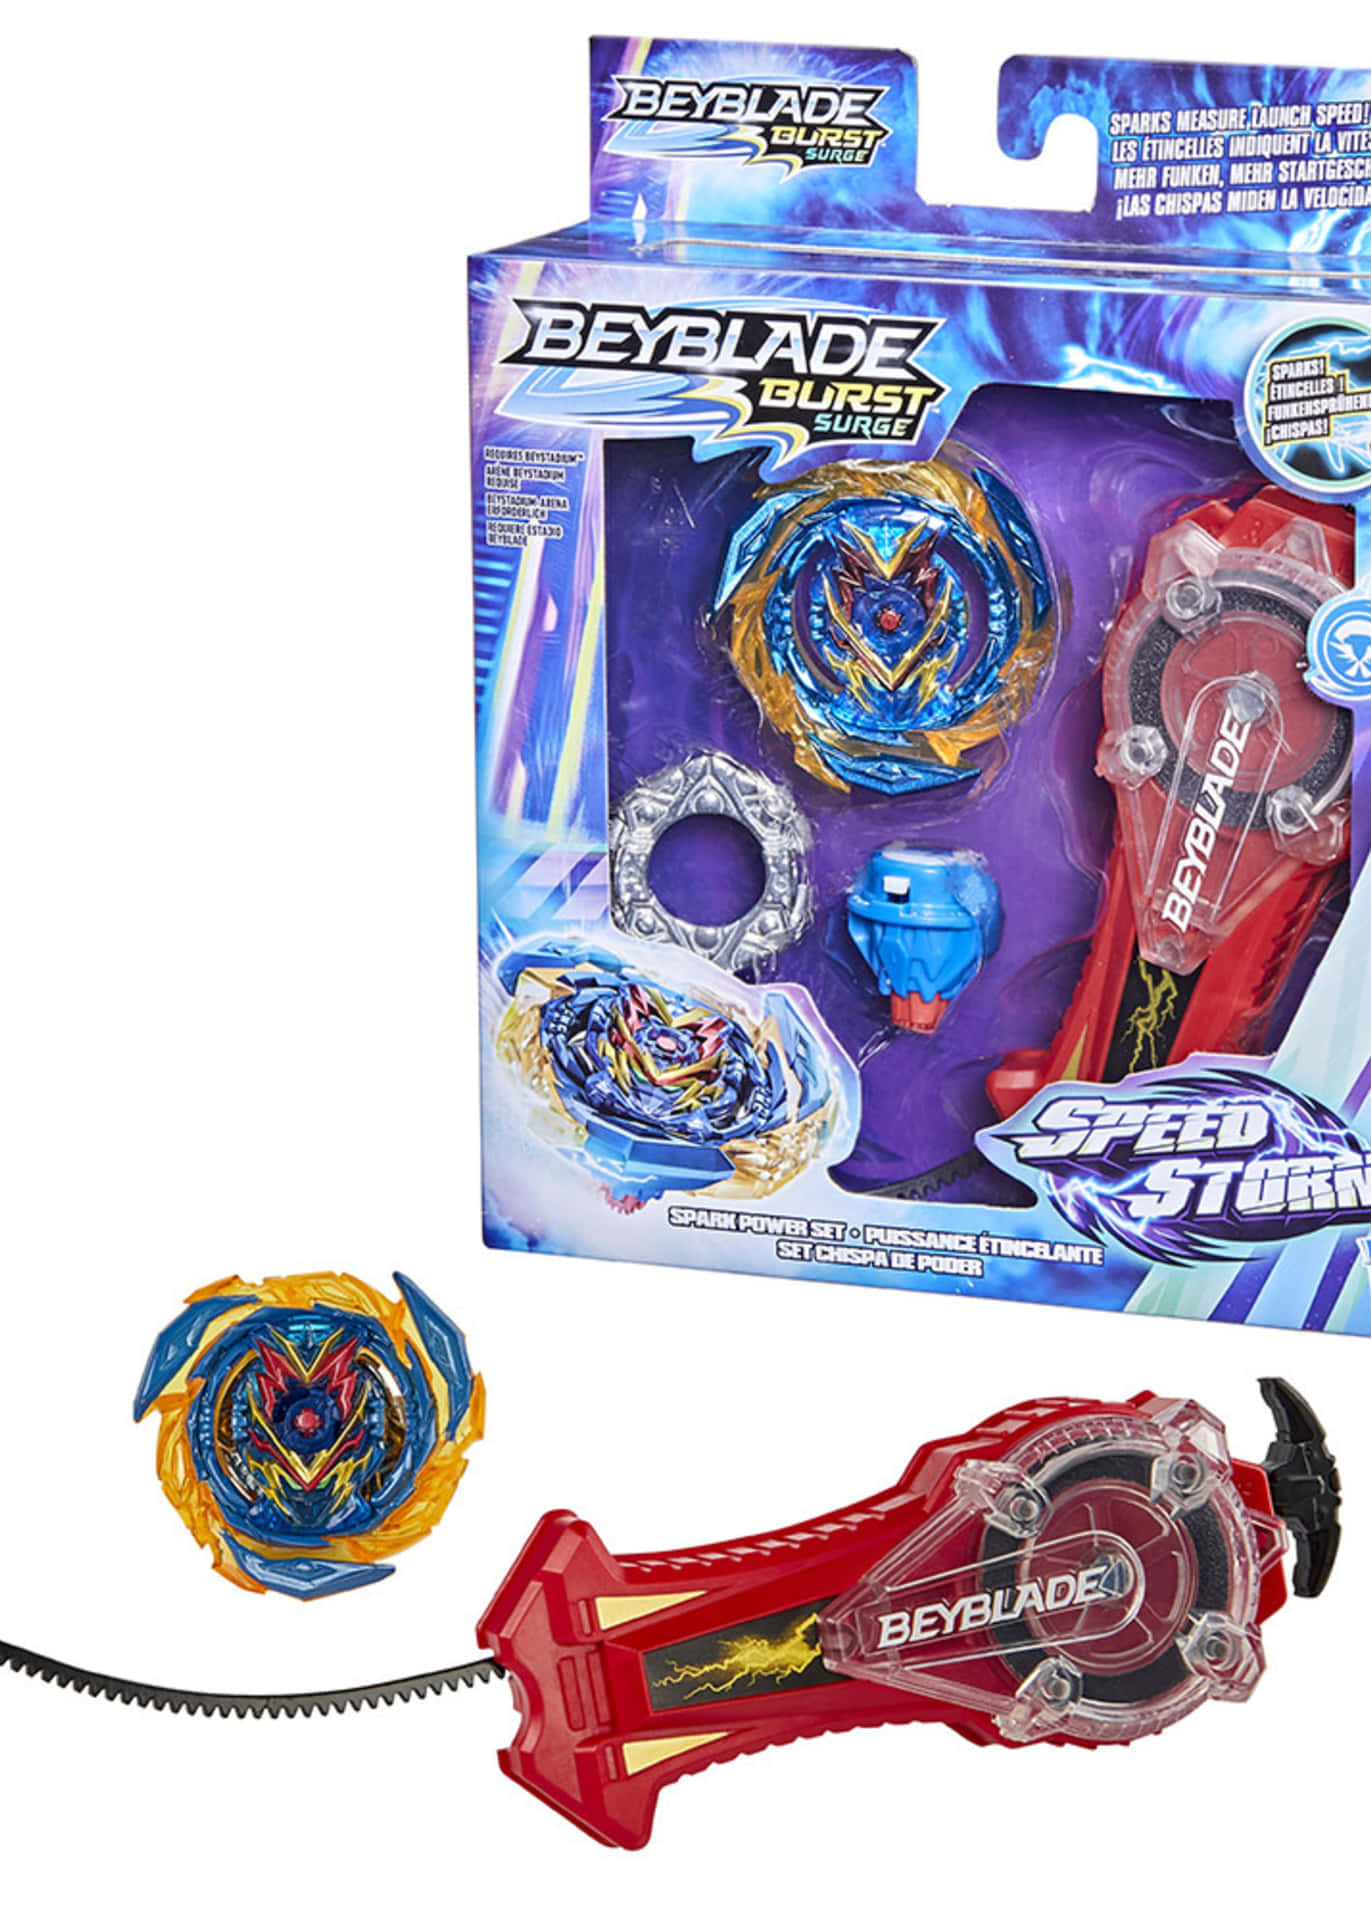 "Experience The Excitement Of All-Out Beyblade Battles With Beyblade Burst!"